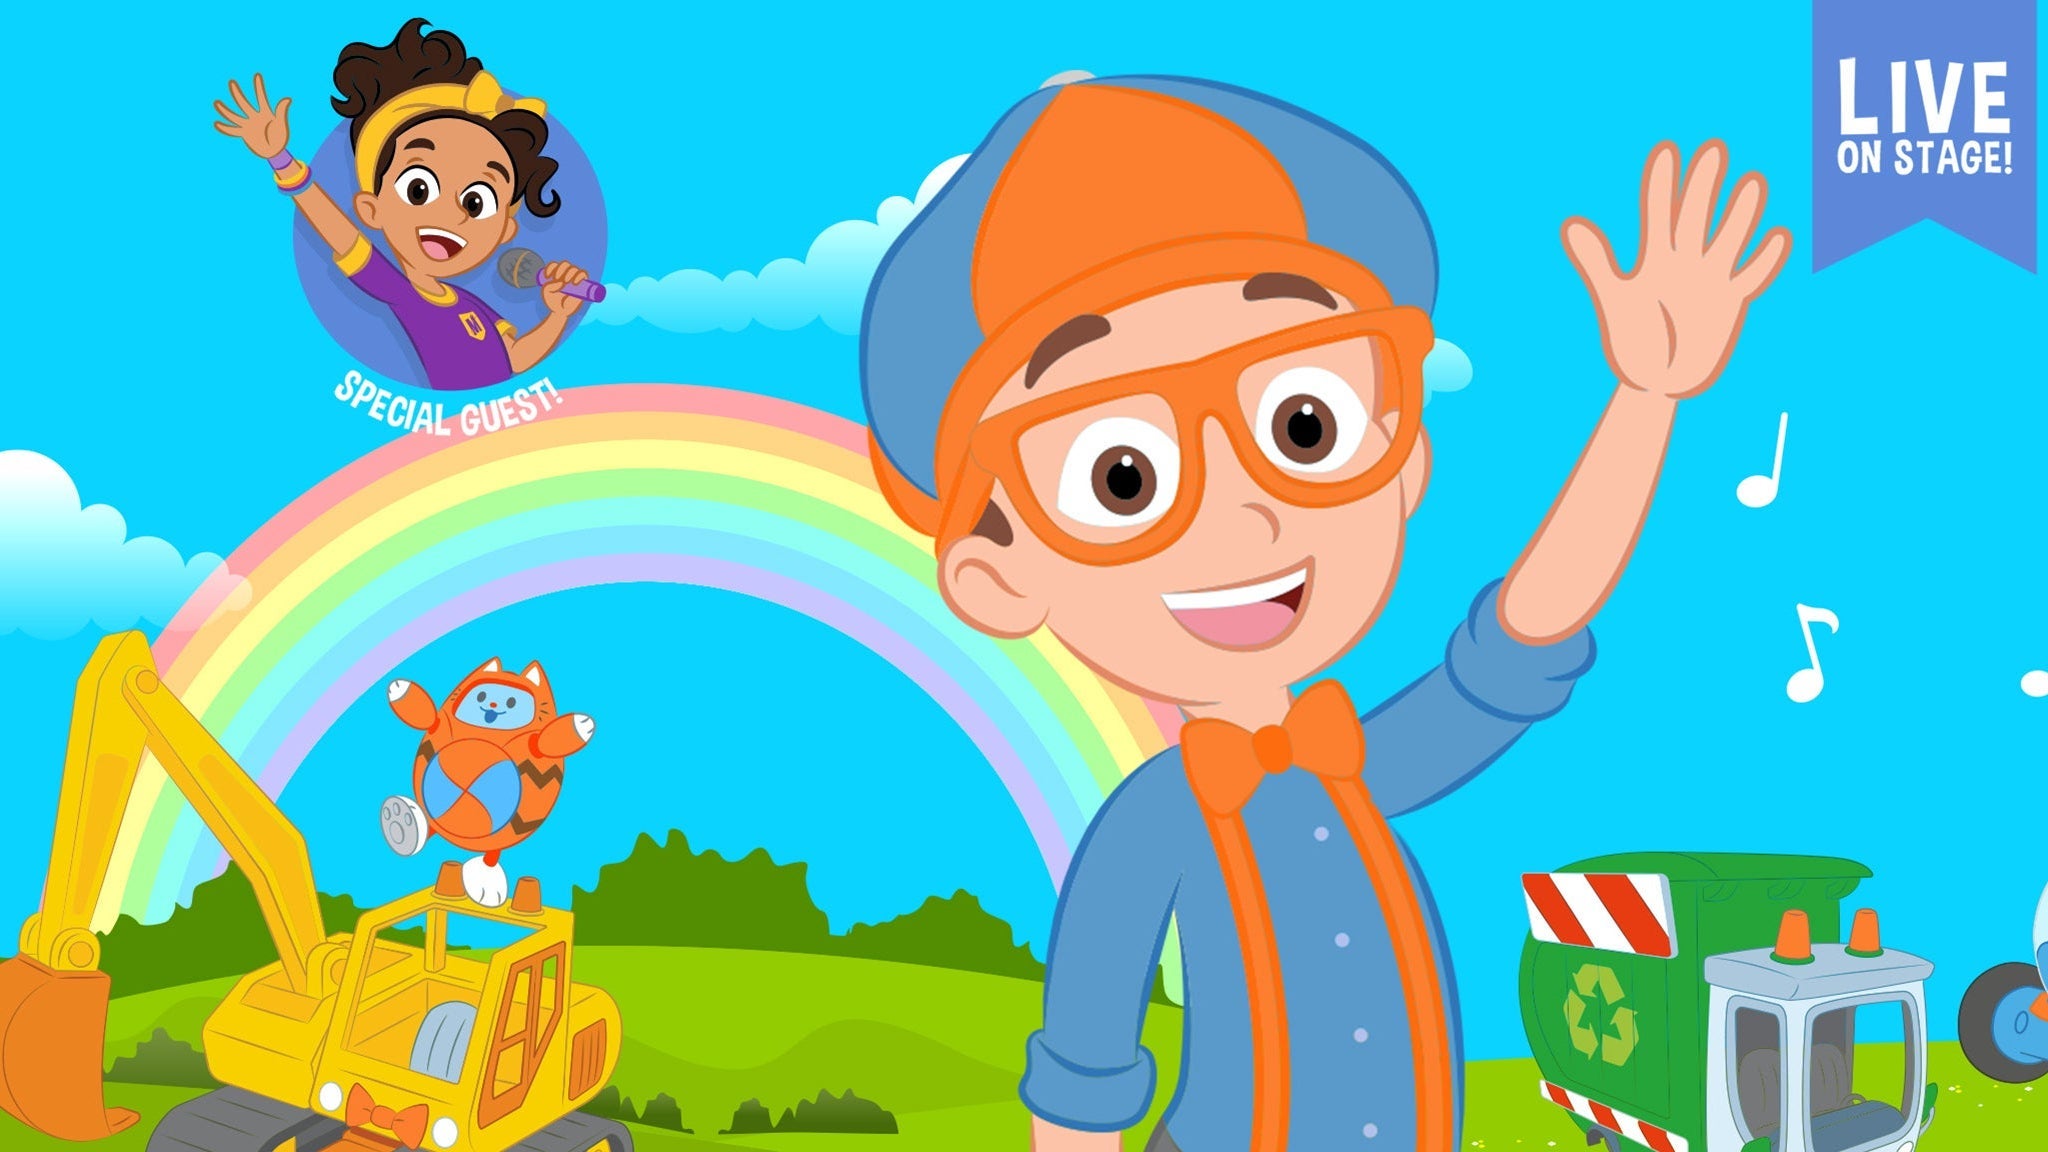 Blippi: The Wonderful World Tour - Post Show Photo Experience presale code for genuine tickets in Fort Smith